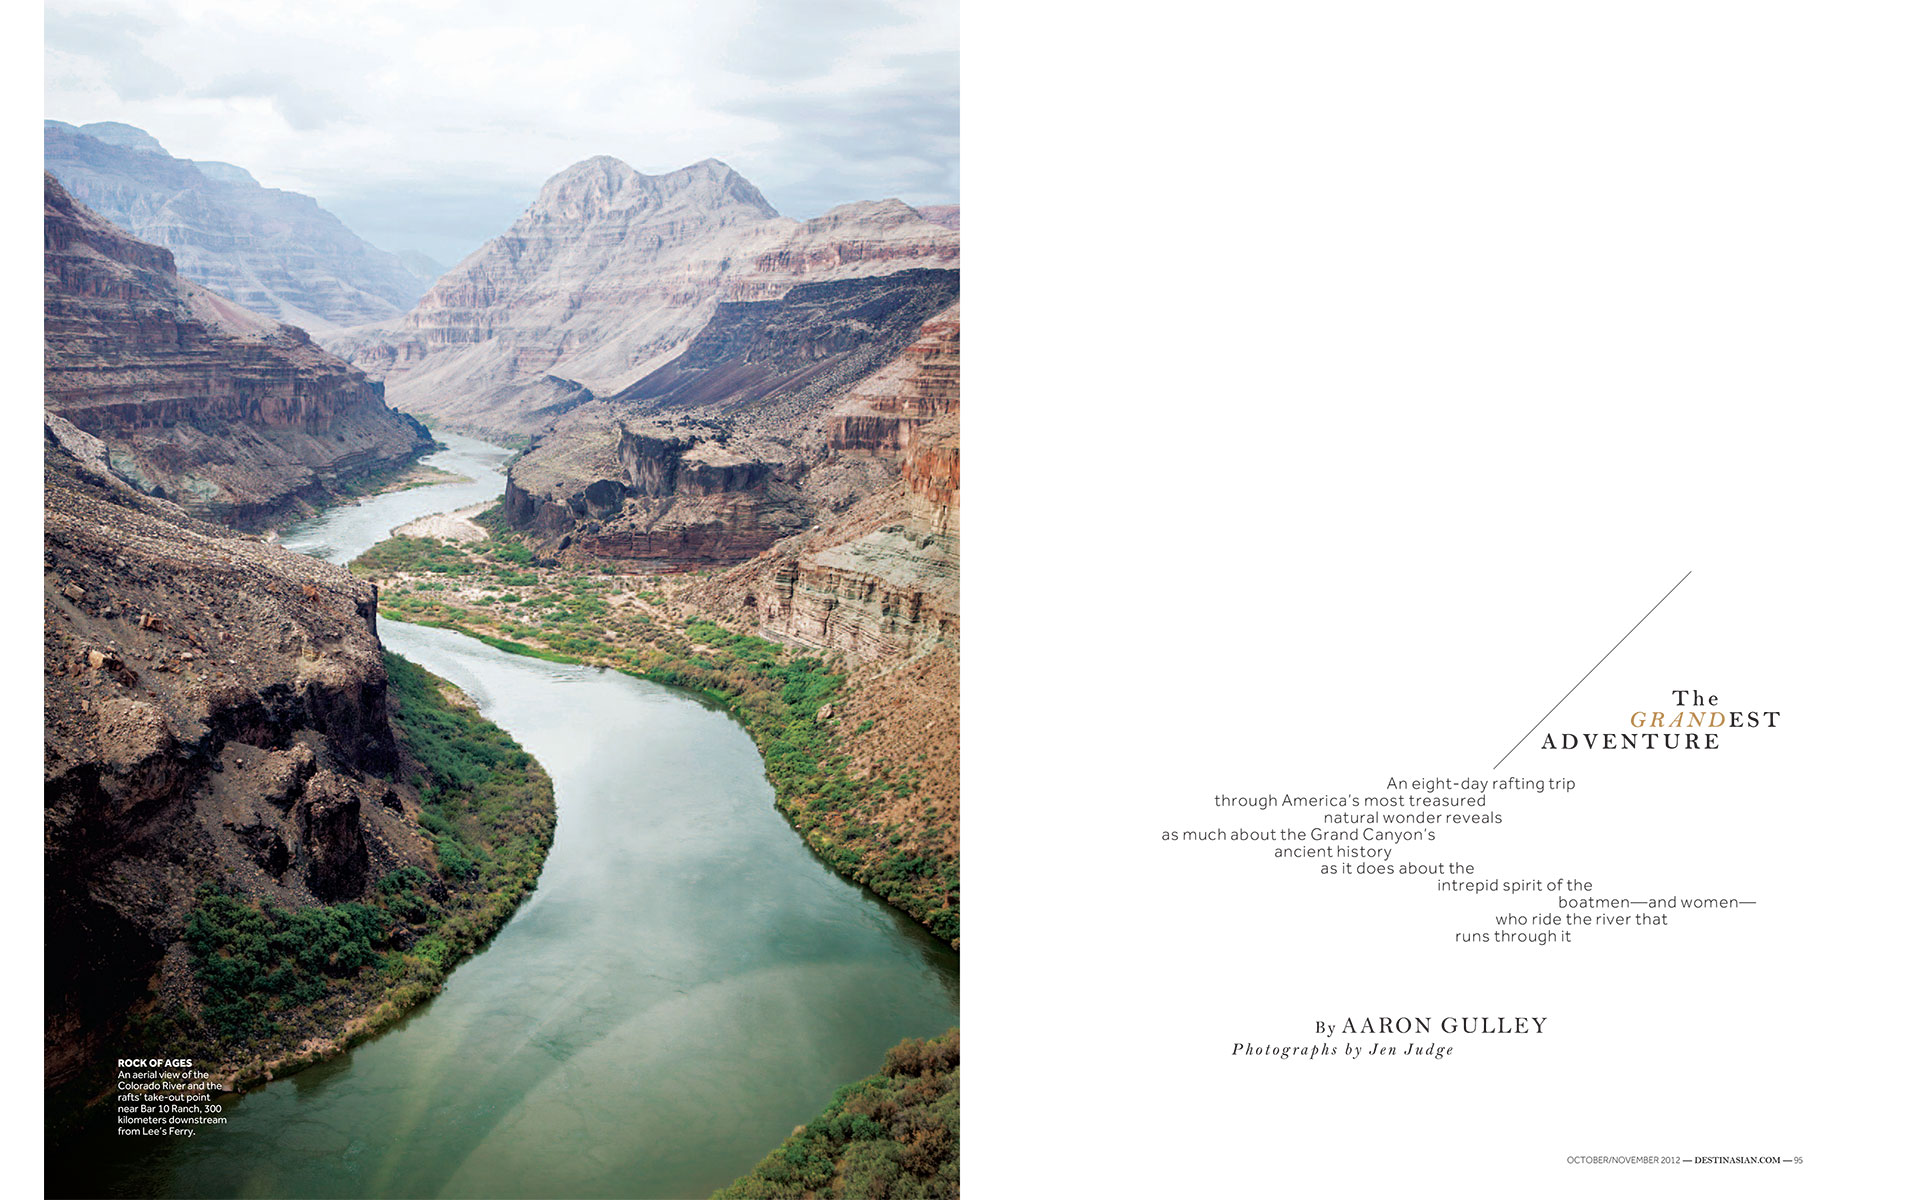 <p style="text-align: center;"><b><font color="2a2871">The Grandest Adventure, DestinAsian, October 2012</font></b>
</p>
An eight-day rafting trip through America's most treasured natural wonder reveals as much about the Grand Canyon's ancient history as it does about the intrepid spirit of the boatmen--and women--who ride the river that runs through it.

<p style="text-align: center;"><a href="/users/AaronGulley18670/DA_GC_10-12.pdf" onclick="window.open(this.href, '', 'resizable=no,status=no,location=no,toolbar=no,menubar=no,fullscreen=no,scrollbars=no,dependent=no,width=900'); return false;">Read the Story</a></p>
